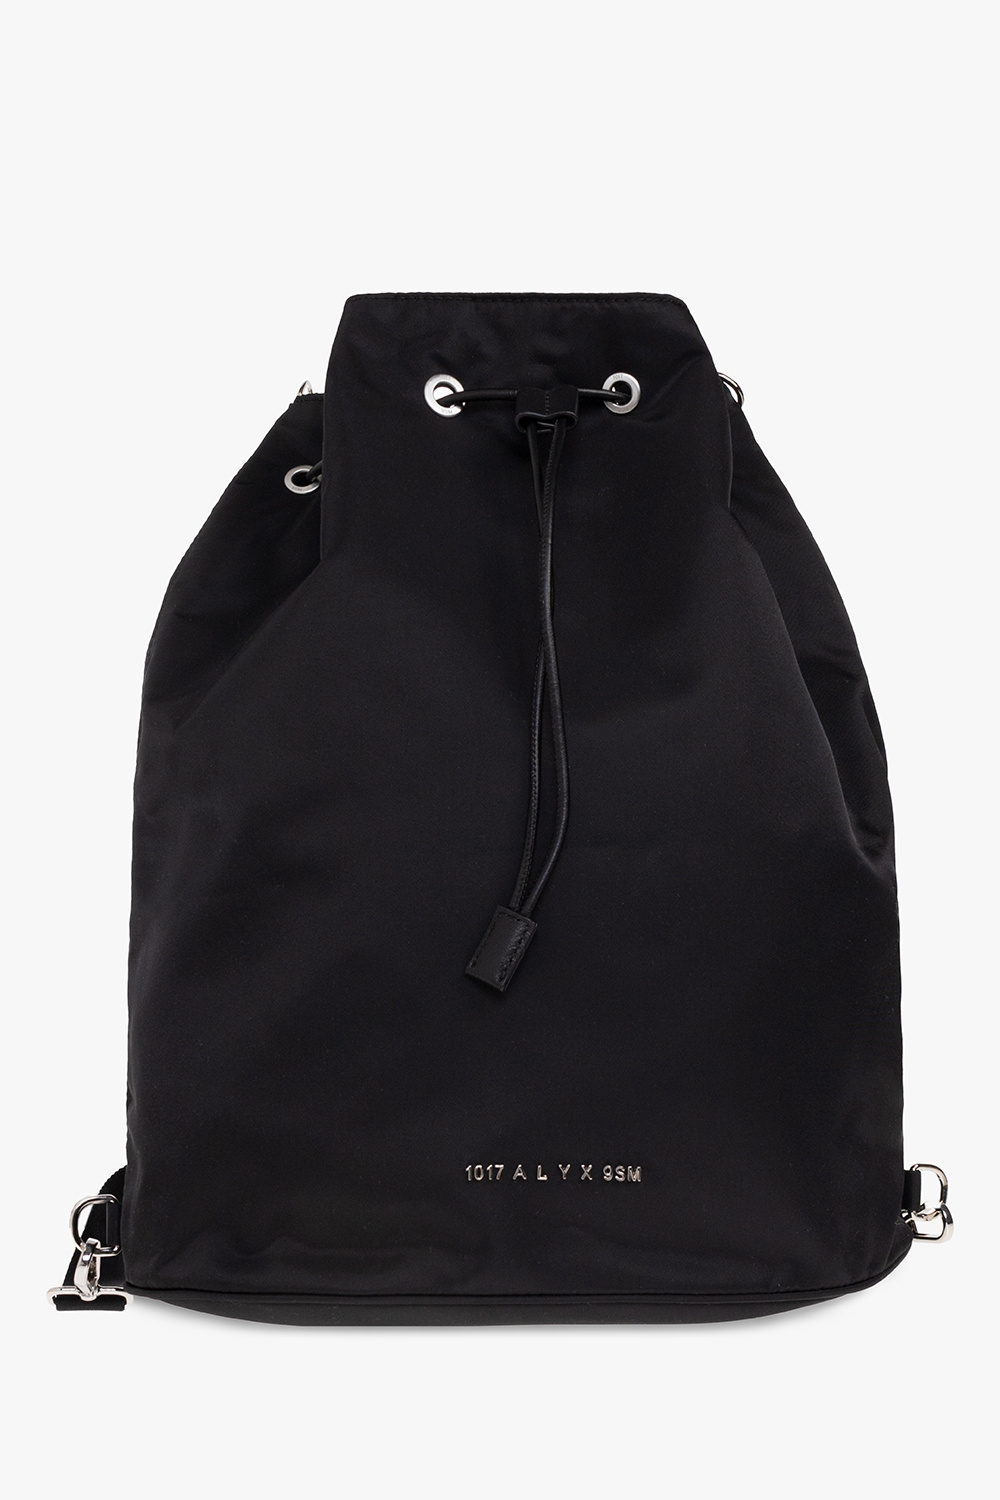 1017 ALYX 9SM Backpack with logo